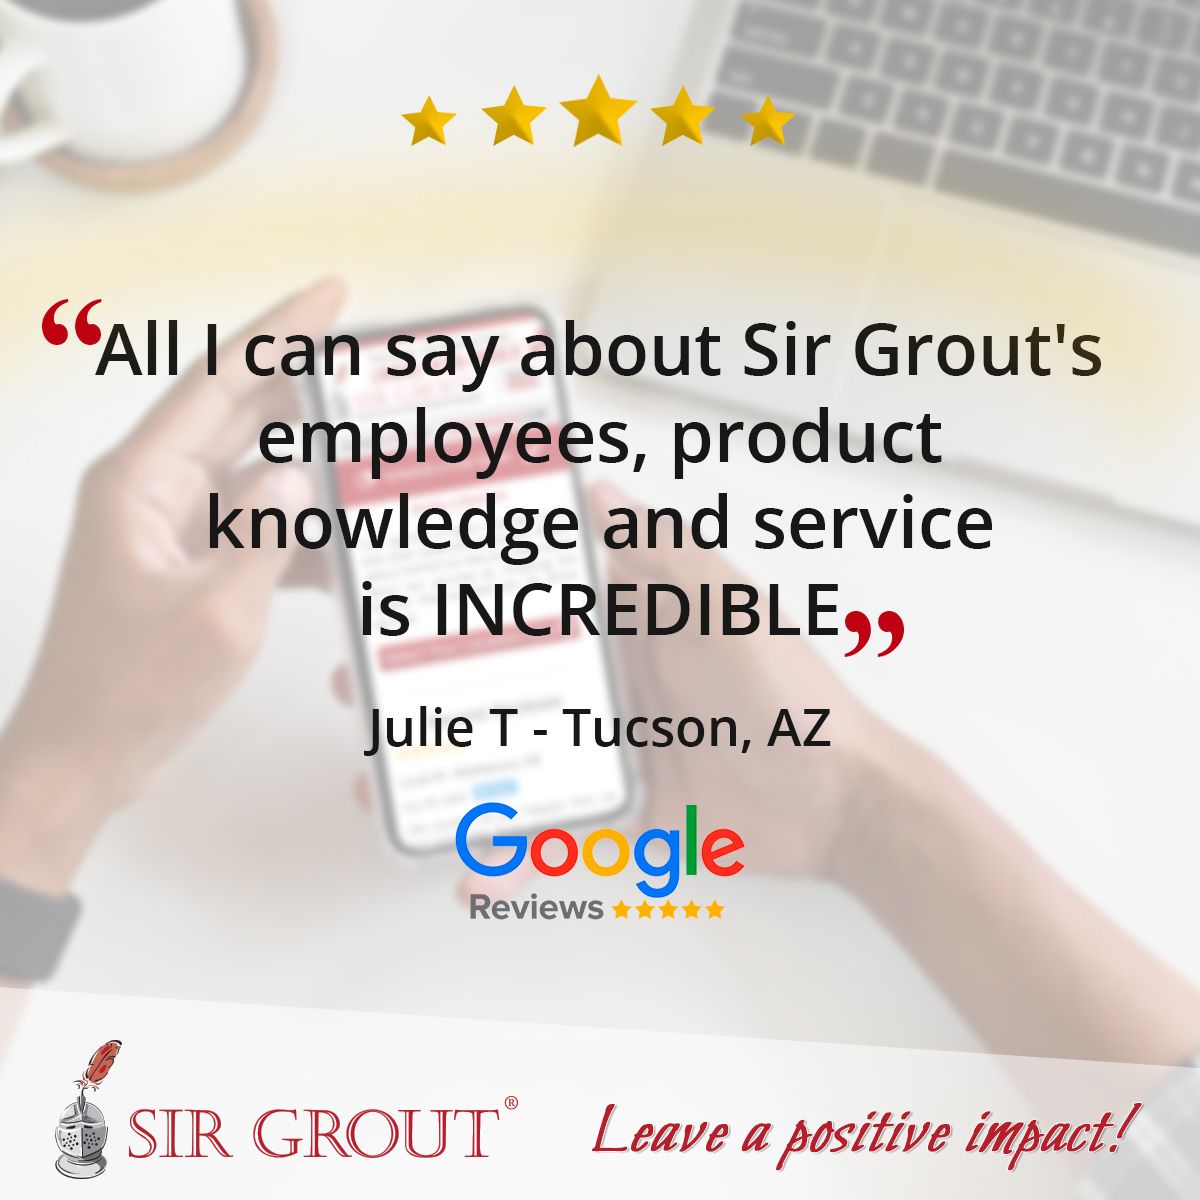 All I can say about Sir Grout's employees, product knowledge and service is INCREDIBLE.